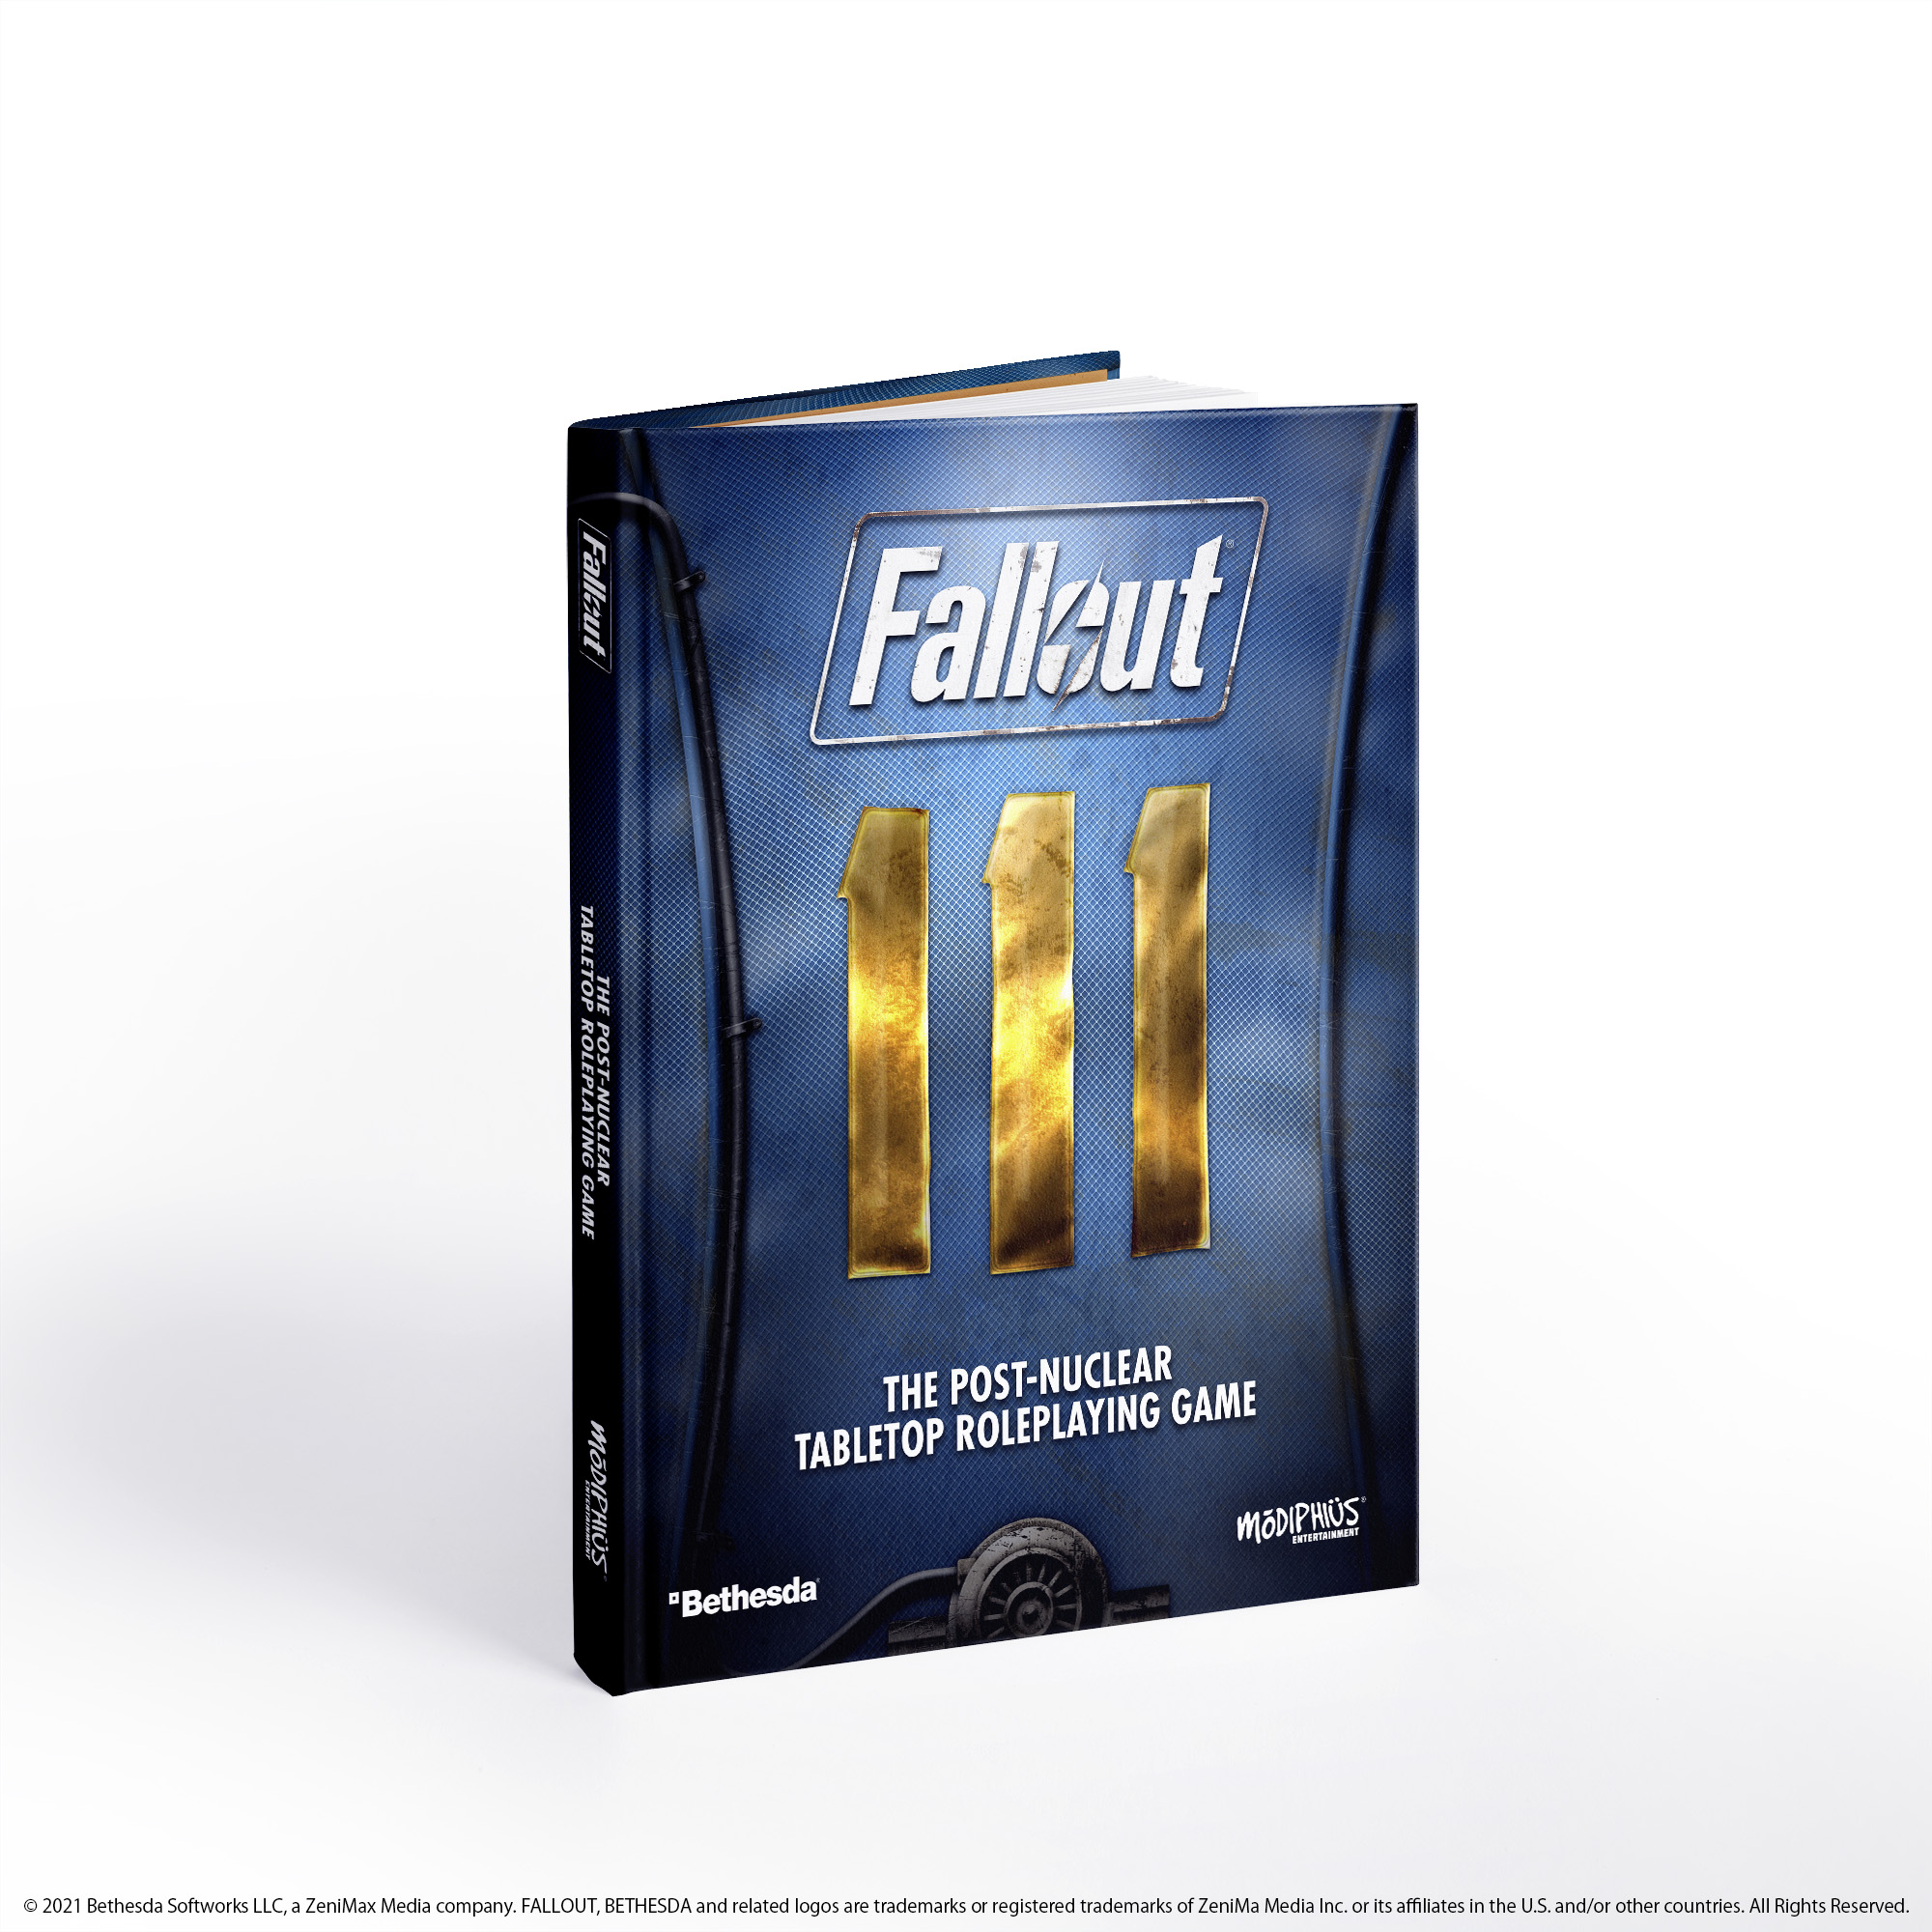 An image of the book and box for Fallout: The Roleplaying Game, a tabletop RPG based on the Fallout series.